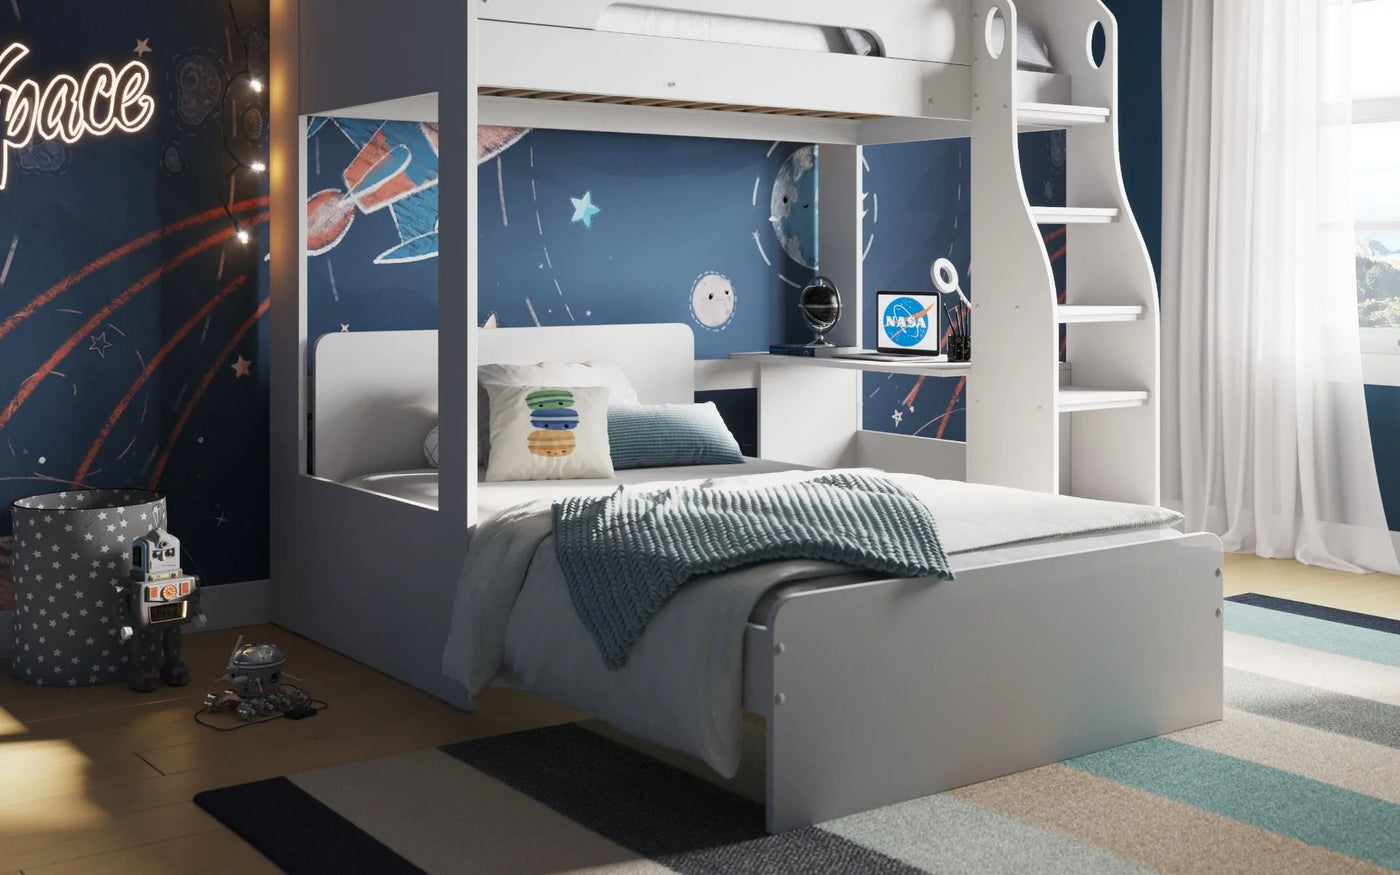 Flair-Cosmic-L-Shaped-Triple-Bunk-Bed-in-White